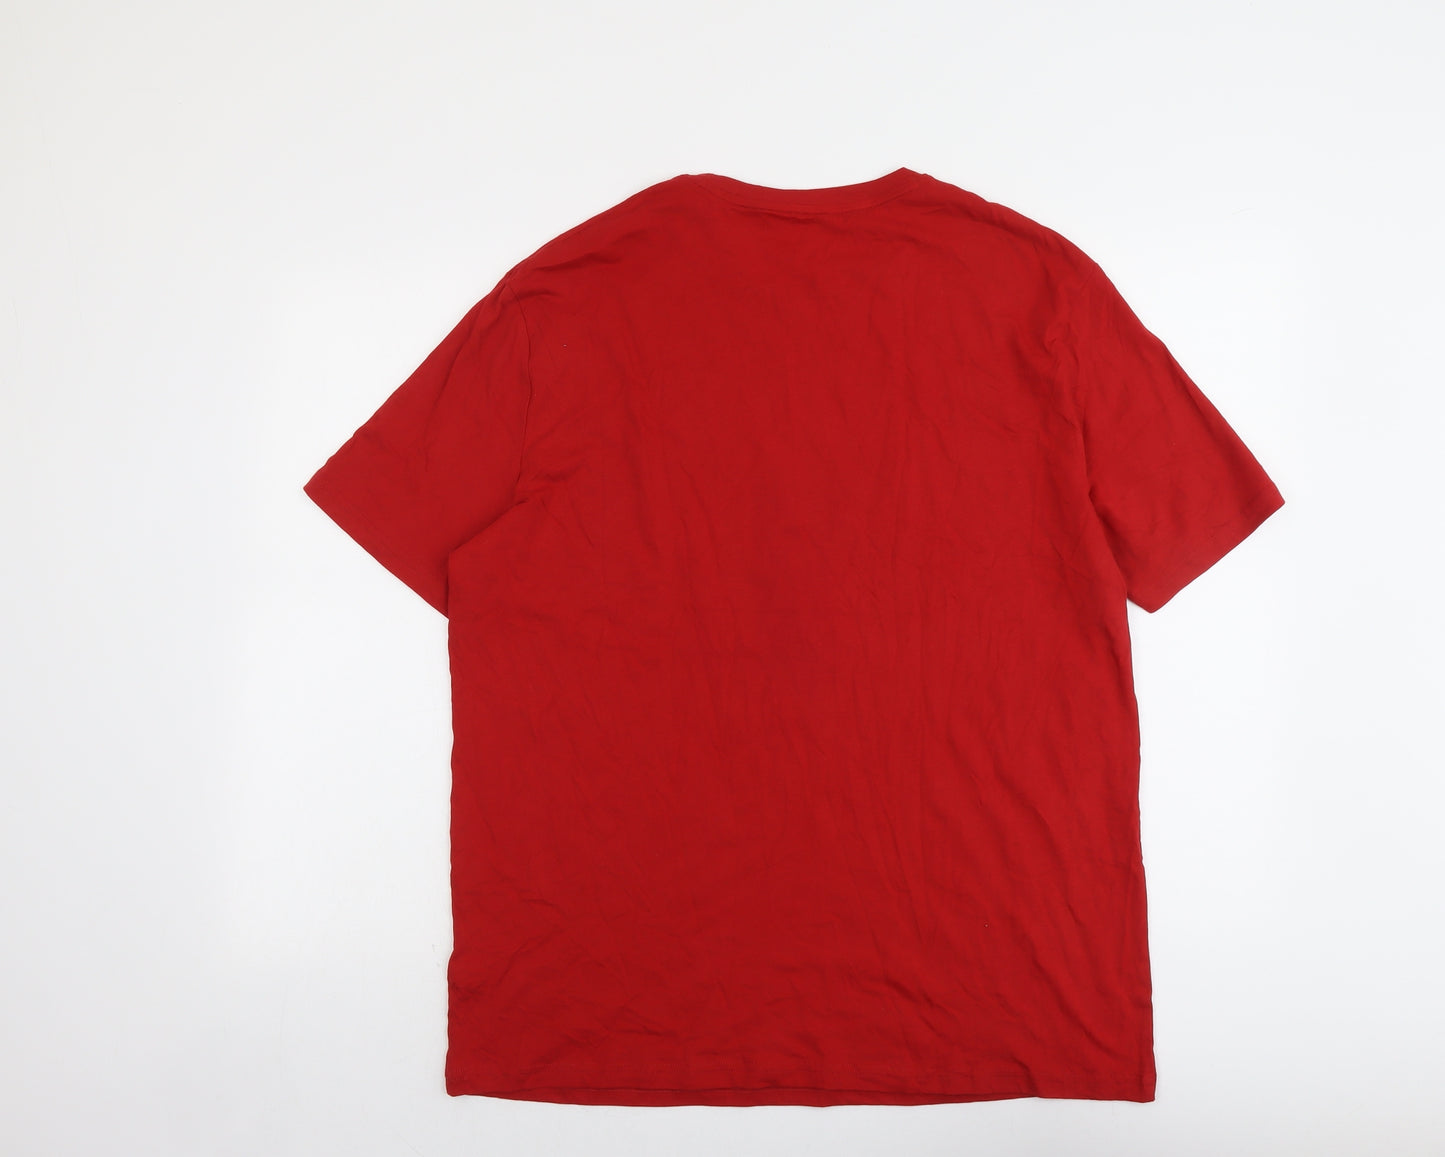 Marks and Spencer Mens Red Cotton T-Shirt Size L Round Neck - Merry Christmas Brew-Dolph Reindeer